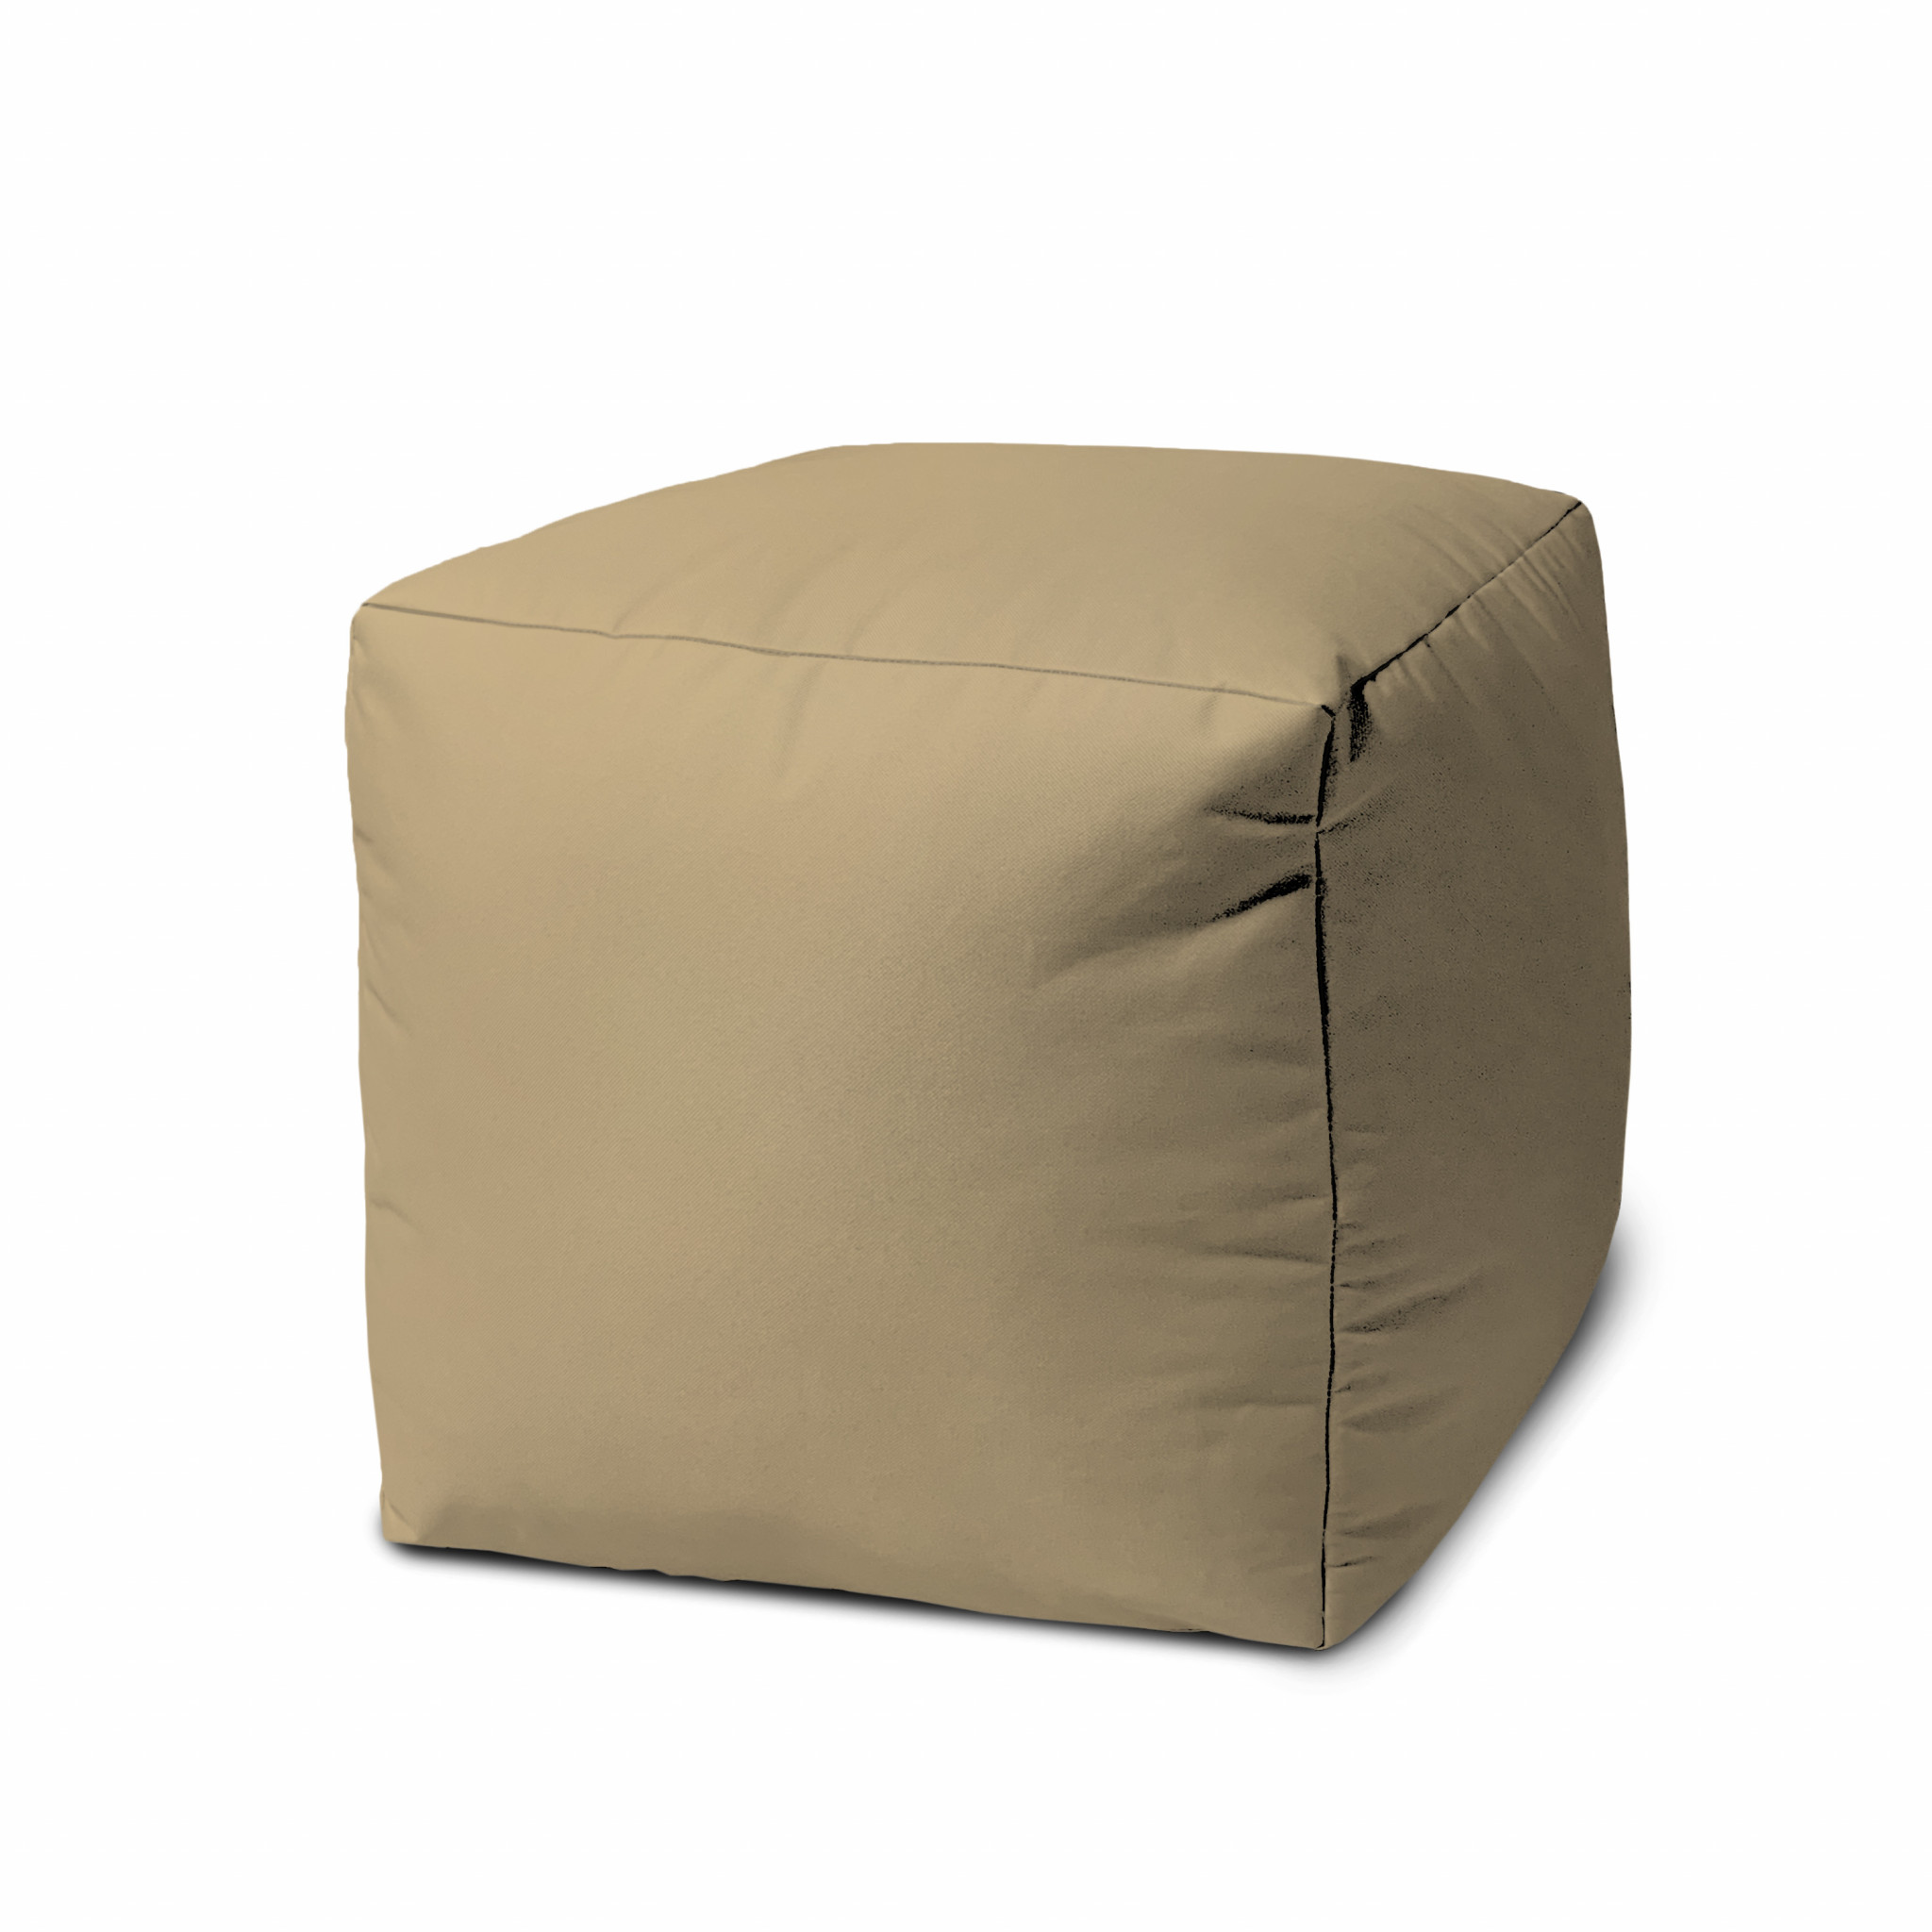 17" Cool Khaki Tan Solid Color Indoor Outdoor Pouf Ottoman-474134-1